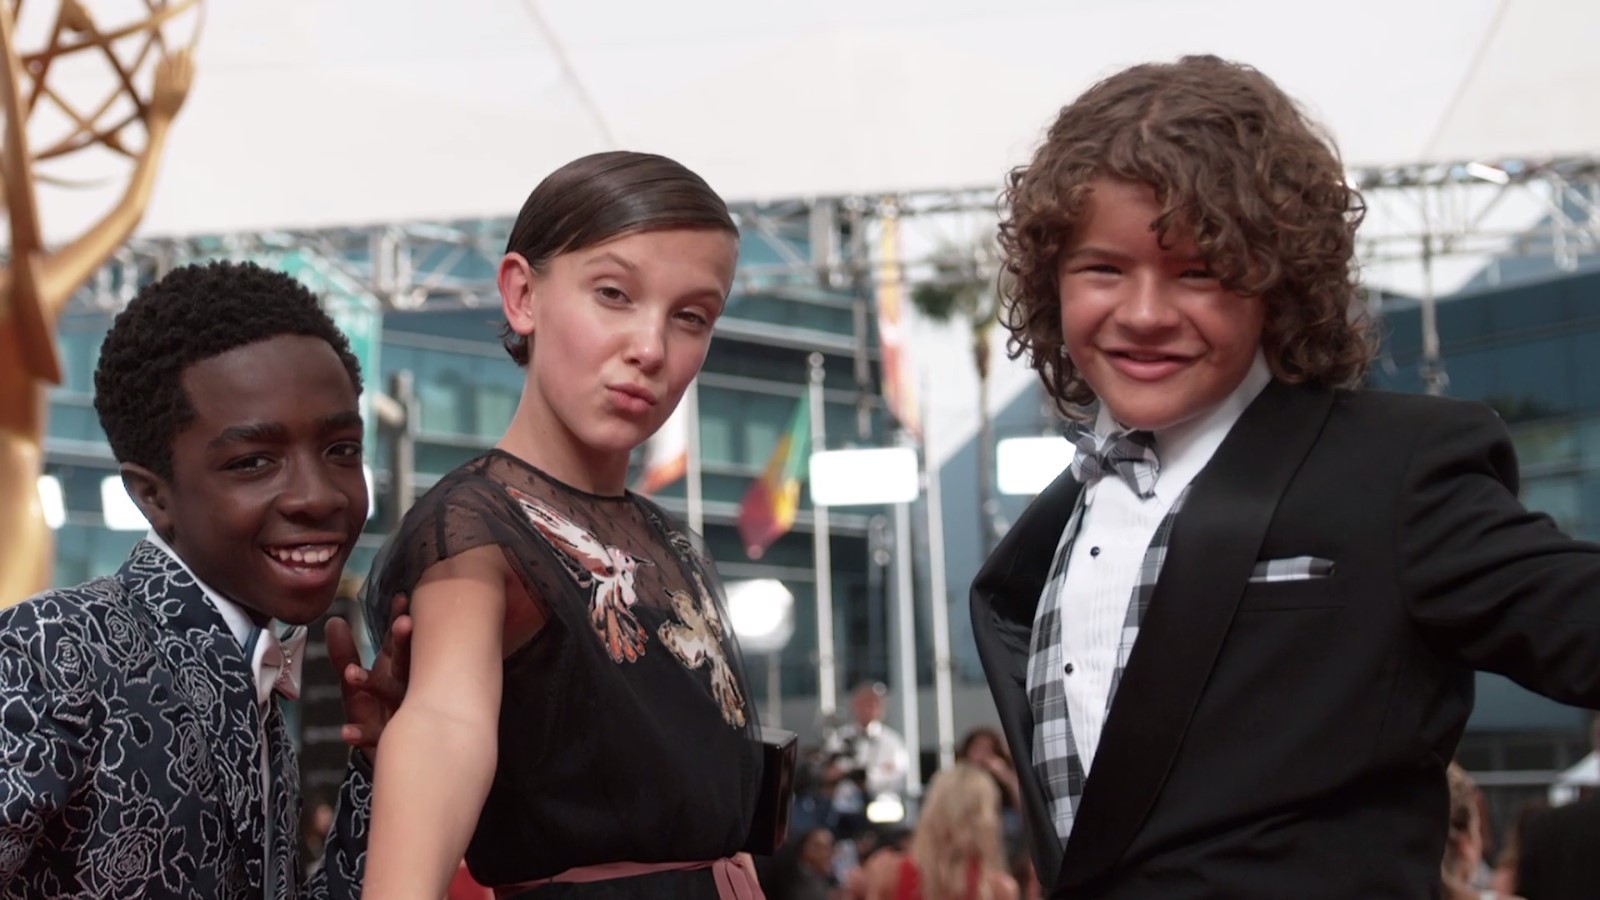 Stranger Things cast at Emmy Awards Red Carpet in 2016